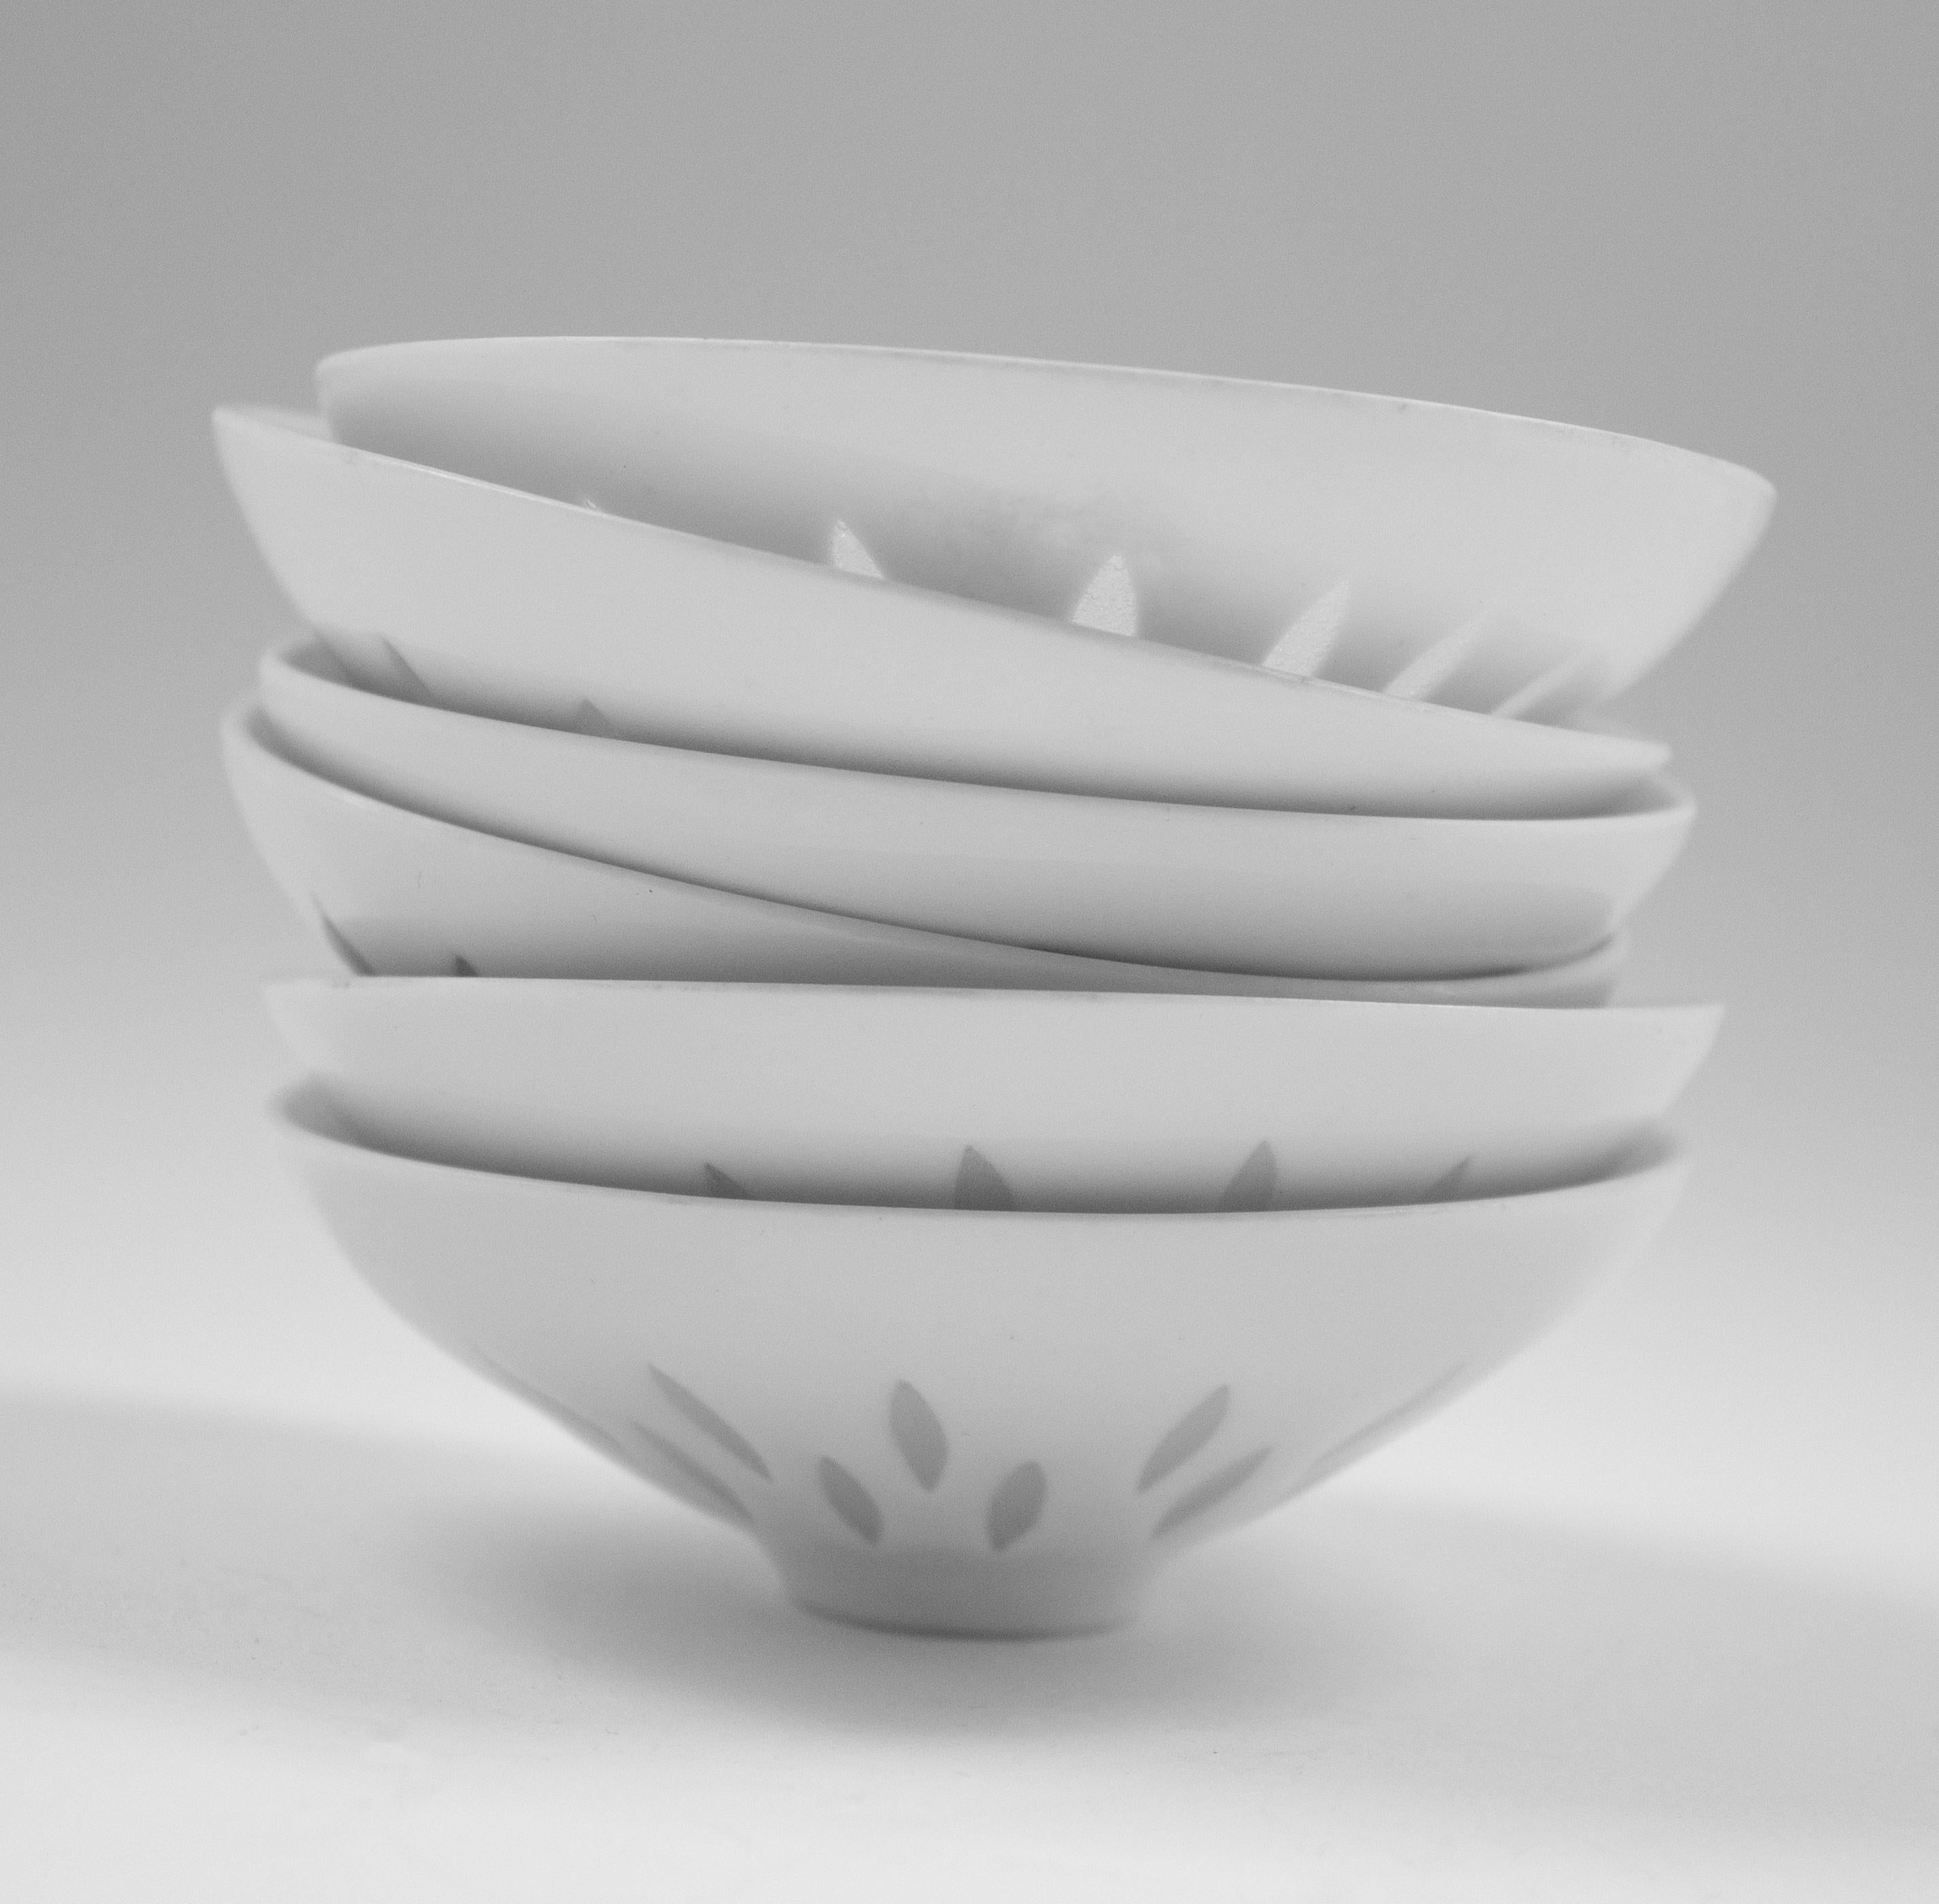 These six Scandinavian Modern small bowls carries a sense of grace and elegance, inviting us to appreciate the beauty that can be found in the most delicate and intricate of creations.

Friedl Holzer-Kjellberg, 1905-1993, graduated as a ceramic